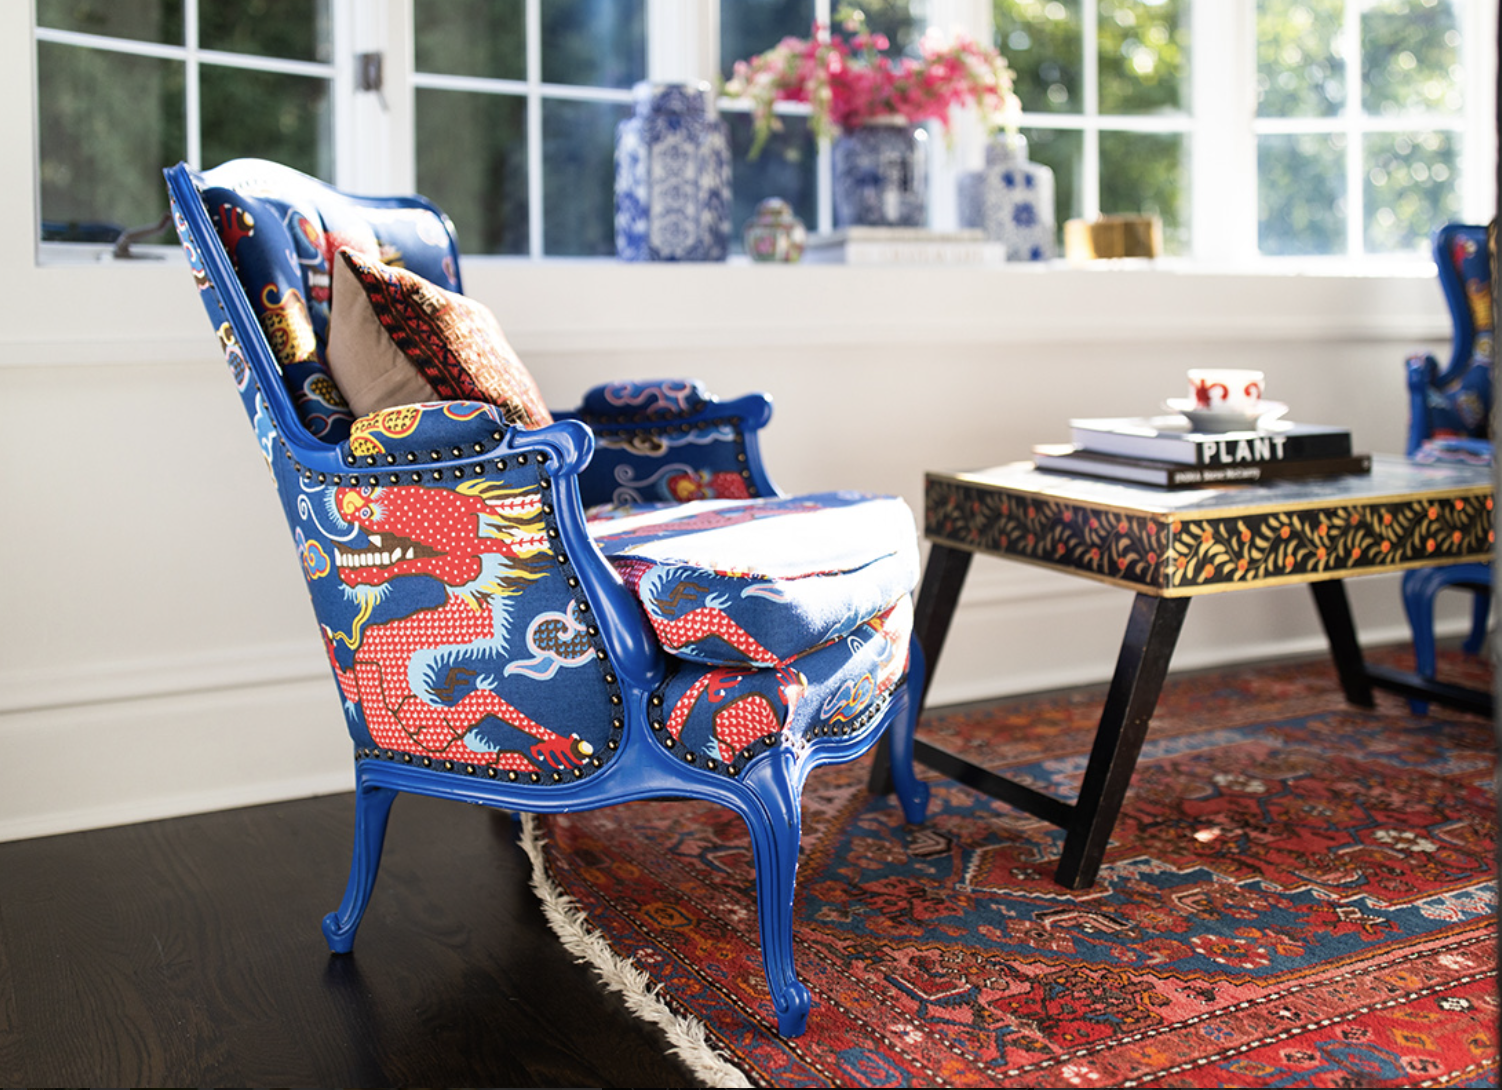 Blue global print accent chair in white room with red rug. Chair colors are bright and there is a dragon design on the chair. Next to the chair is a coffee table with decor on it.